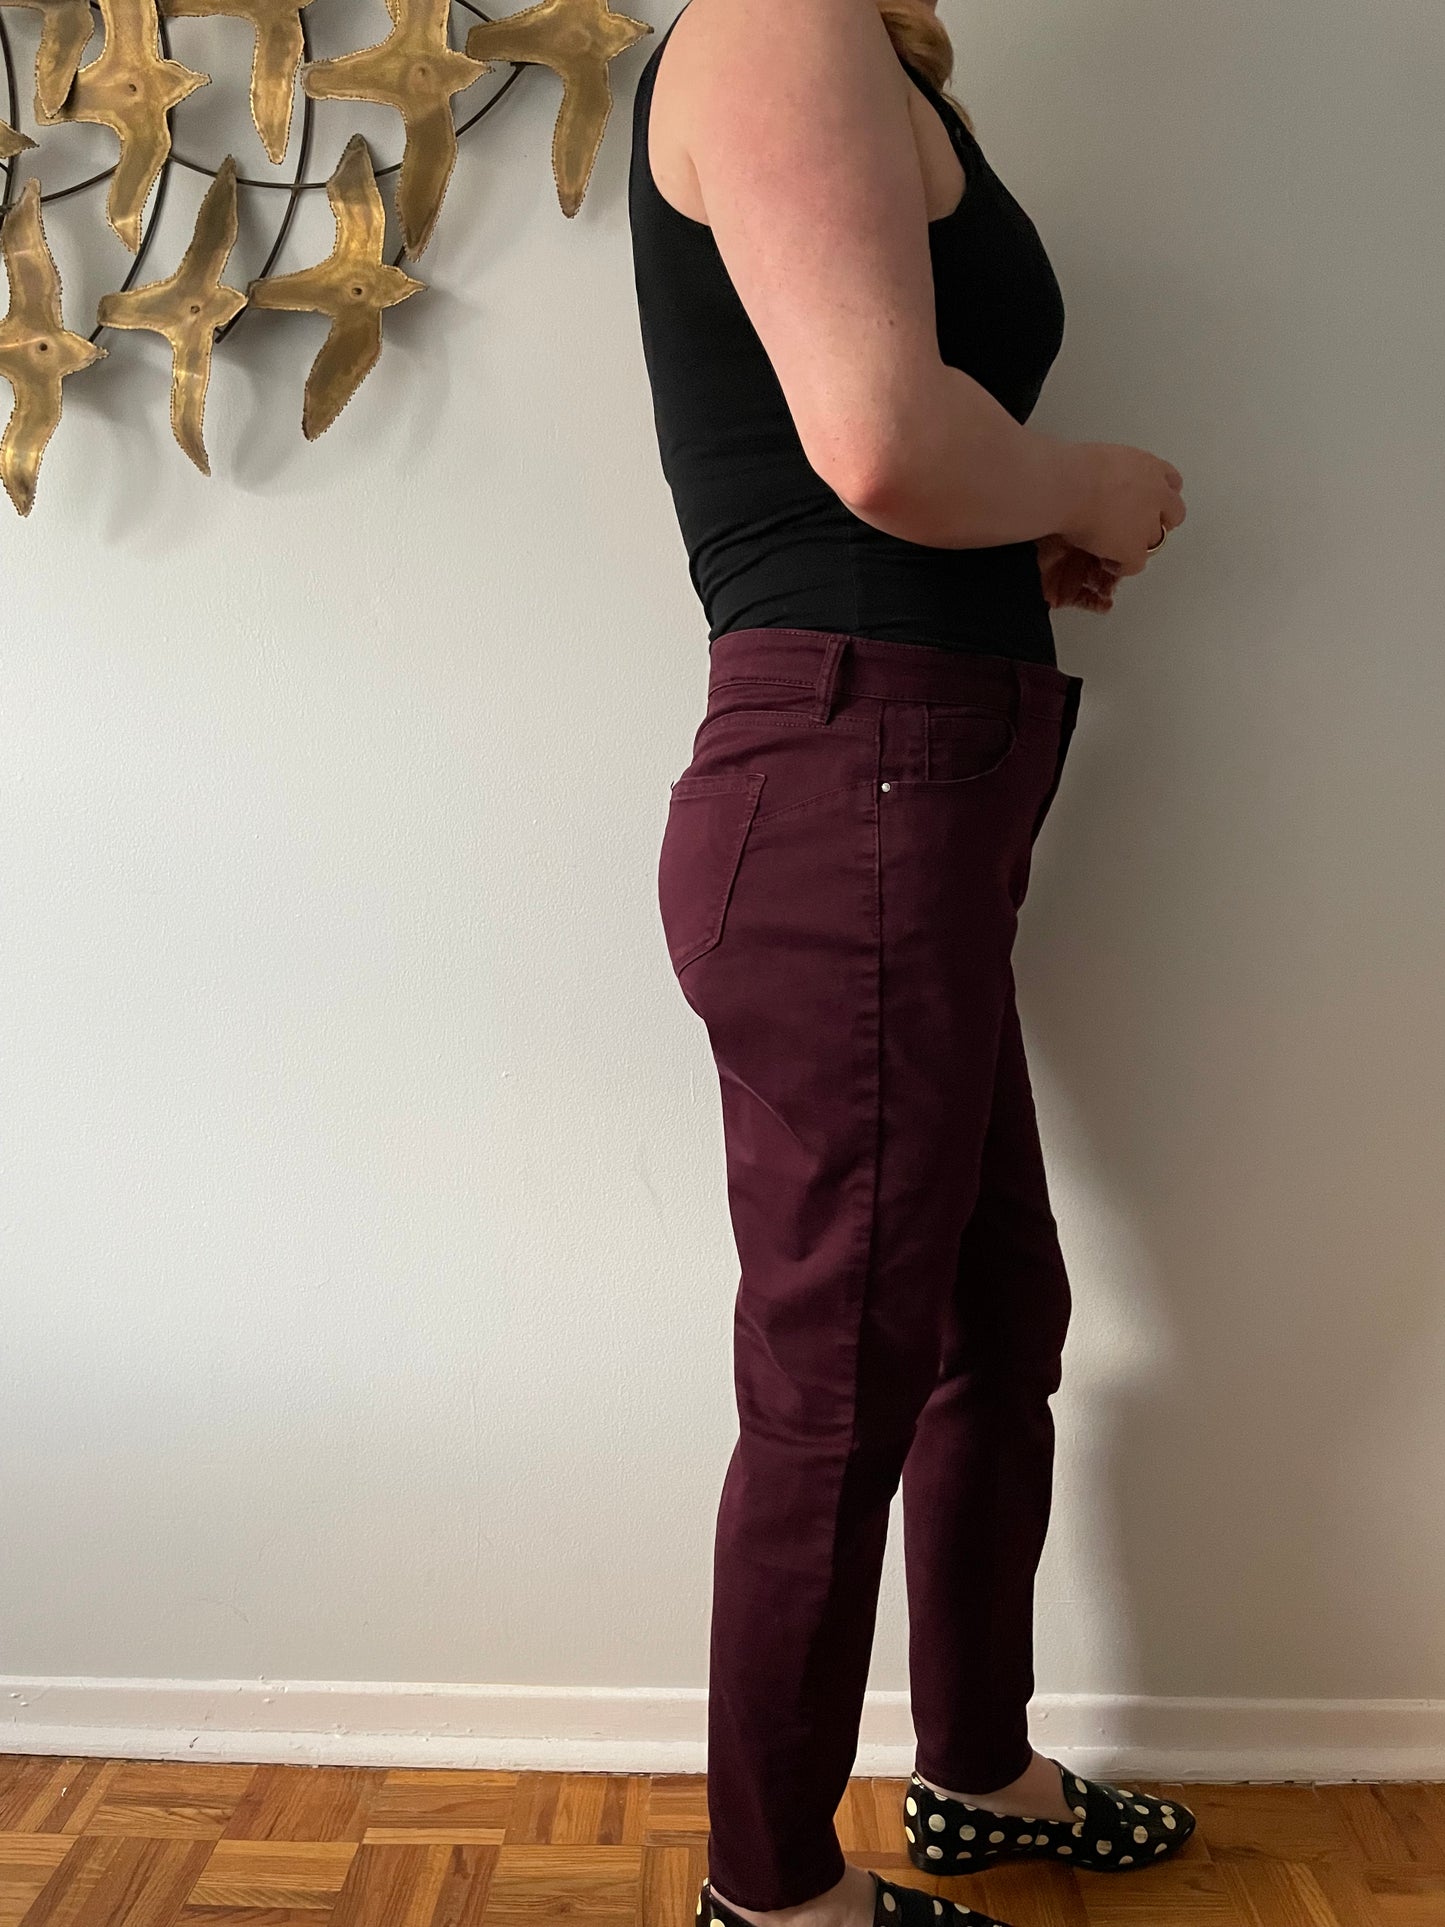 R Jeans Wine Red Slim Stretch Pants - Size 31